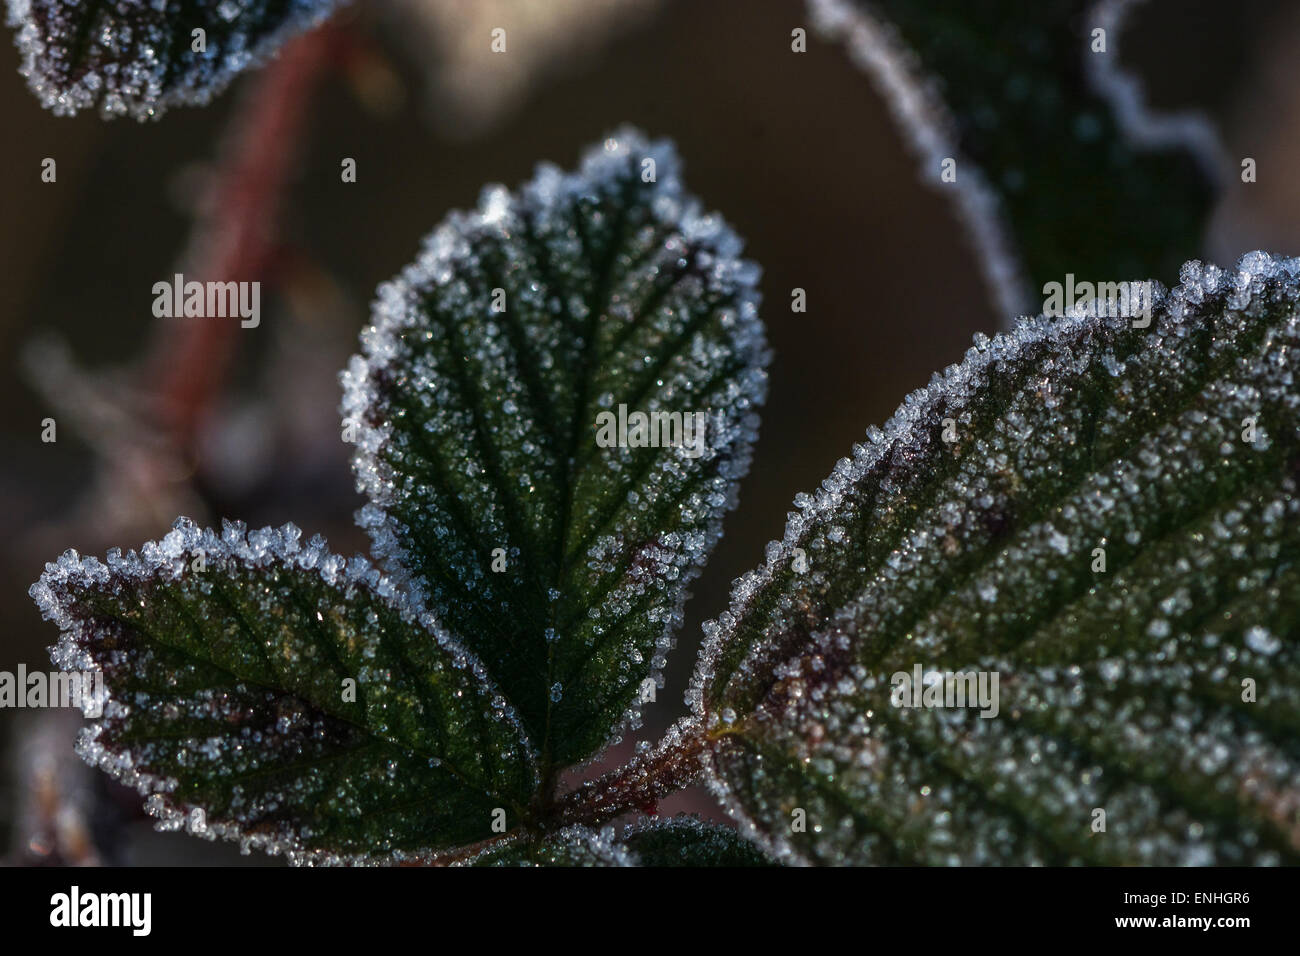 Frost / Ice crystals on bramble leaves. Frosty relations concept. Stock Photo